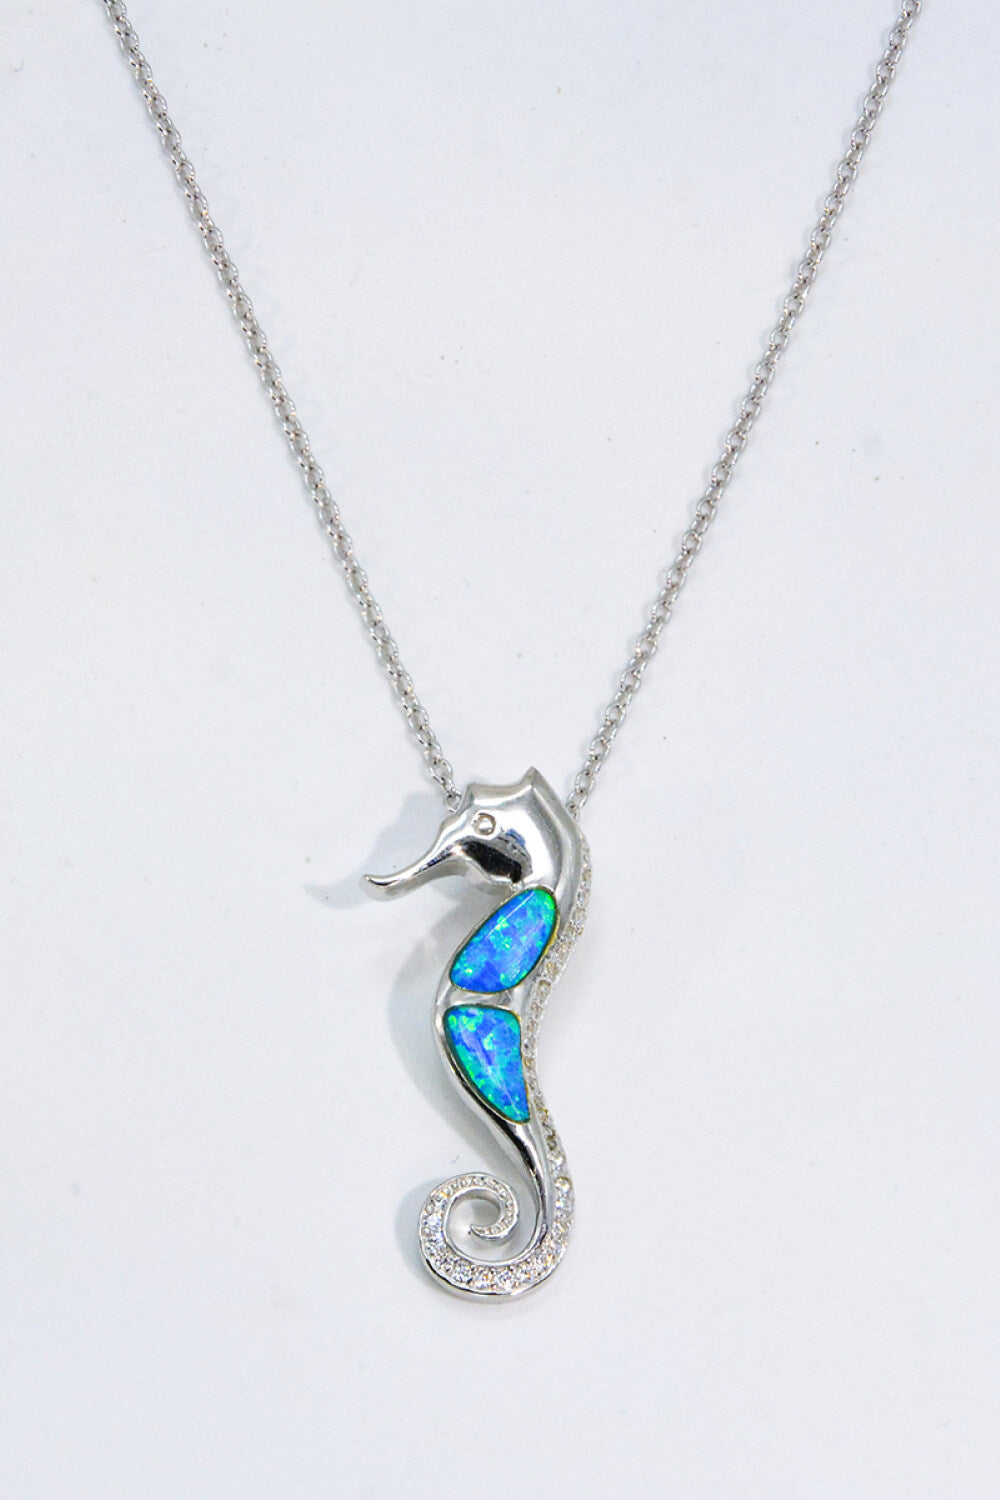 Opal Seahorse 925 Sterling Silver Necklace